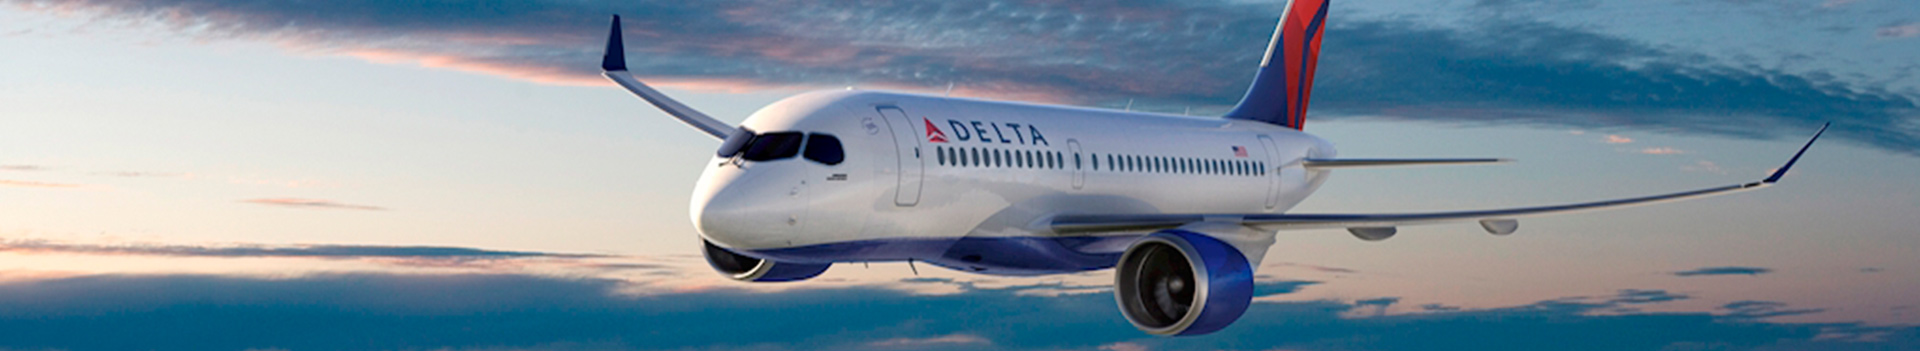 Been There, Loved That: Delta Air Line’s Flights to Seattle | AMA Travel